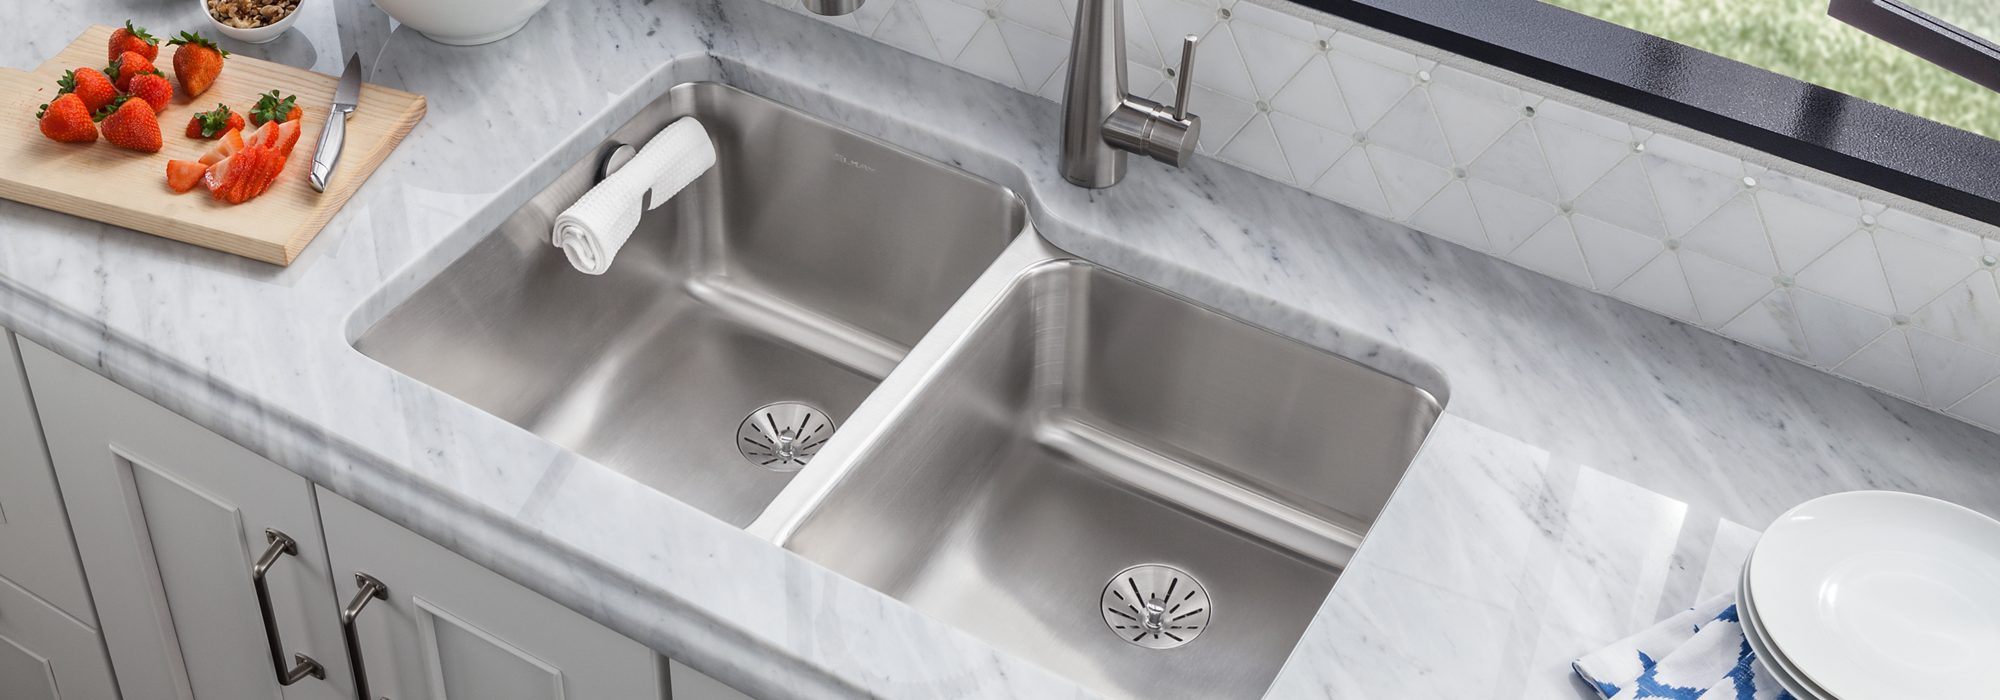 Stainless Steel Double Bowl Sink with Perfect Drain